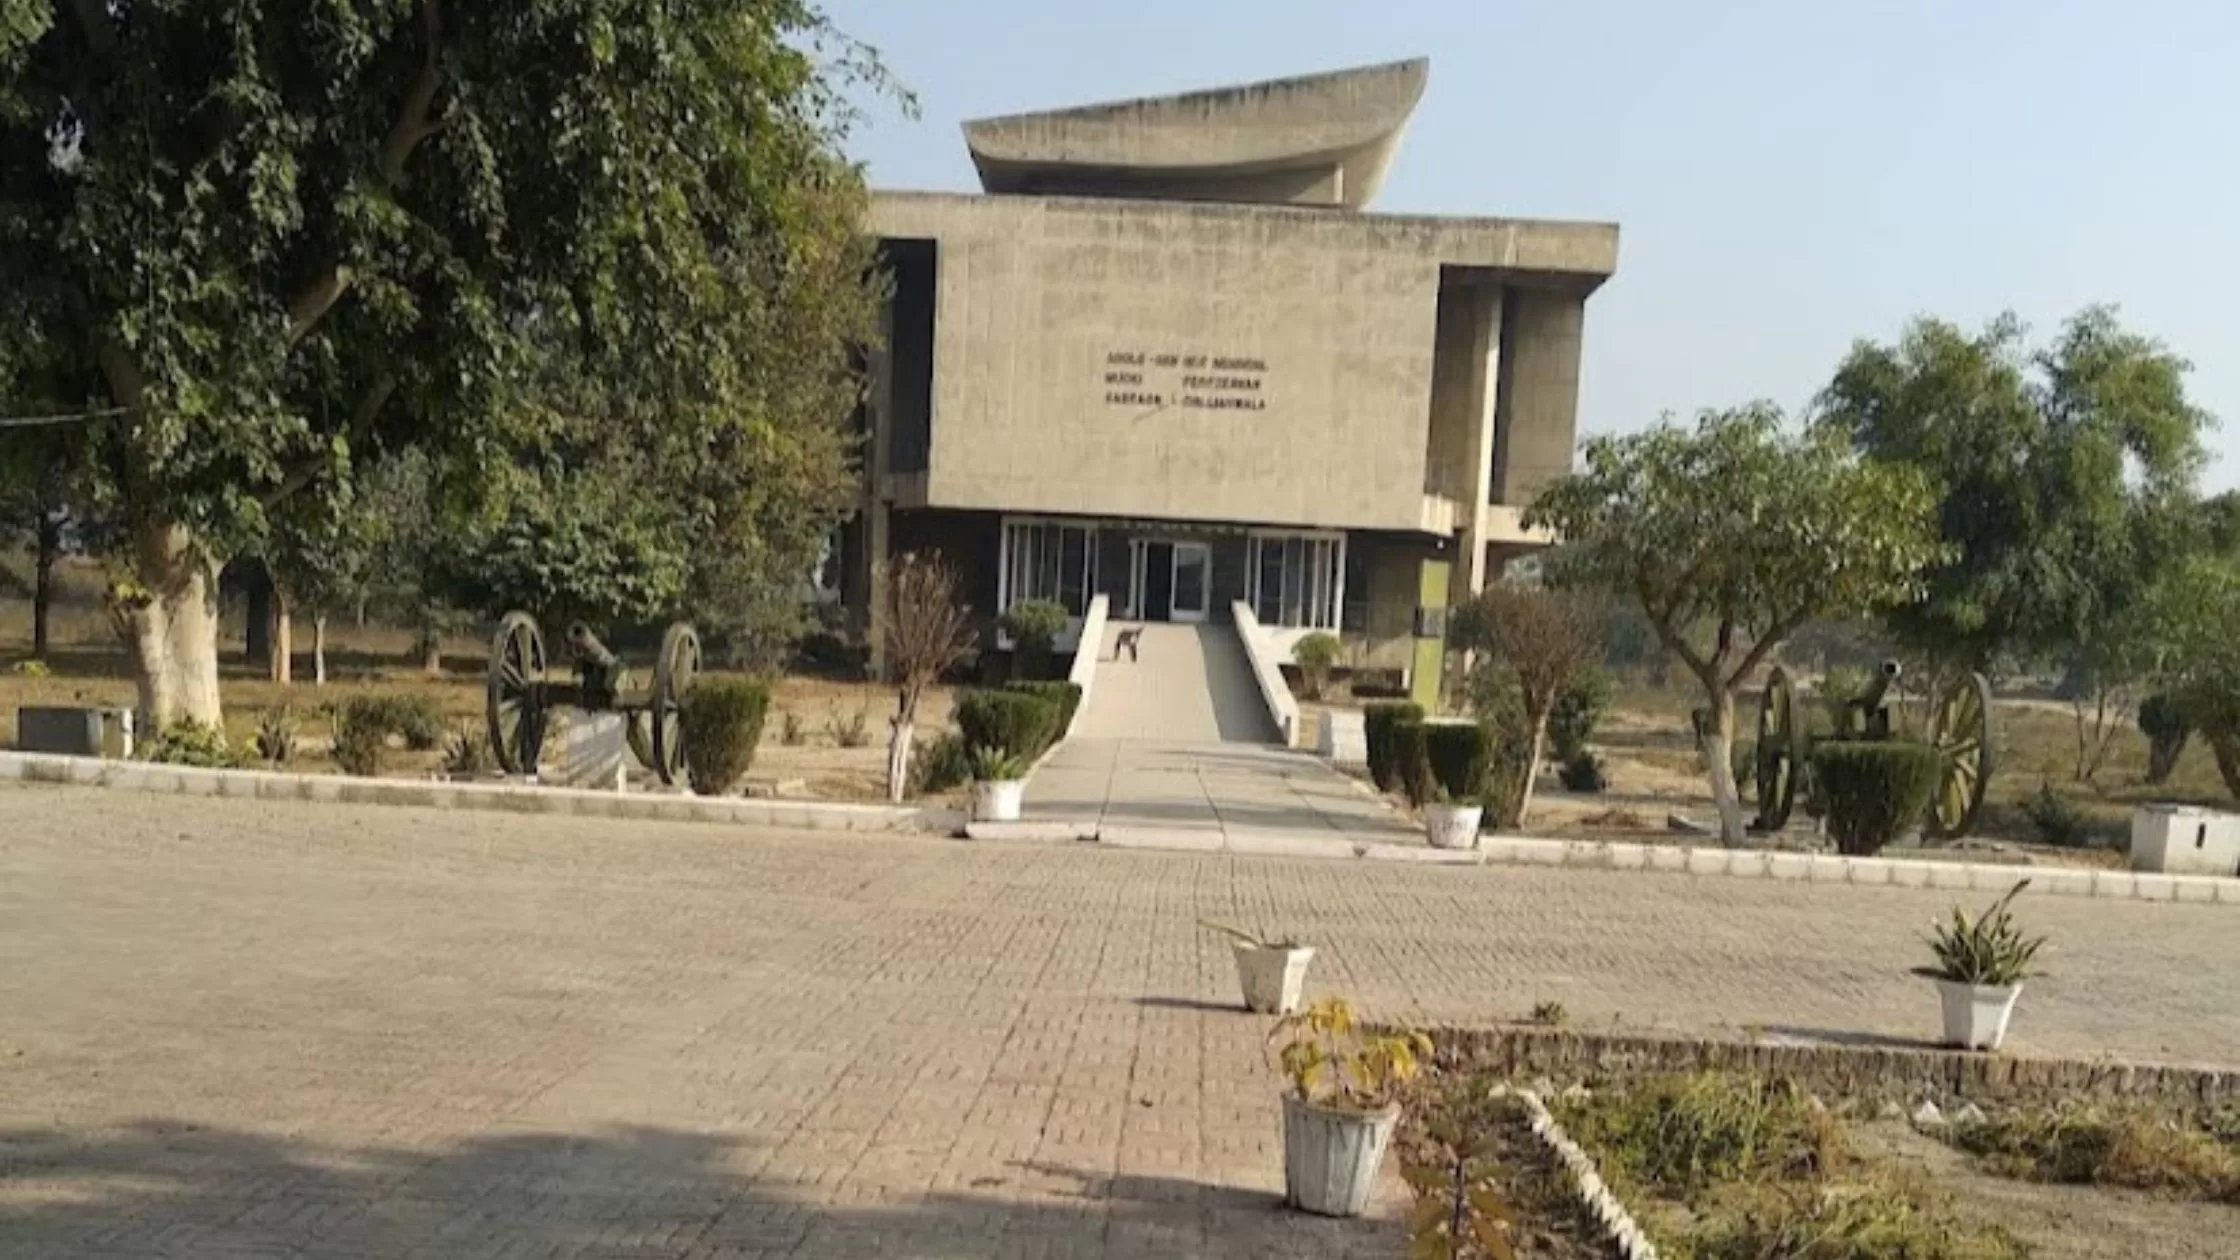 Outside view of one of the best museums in Punjab, Anglo Sikh War Memorial.